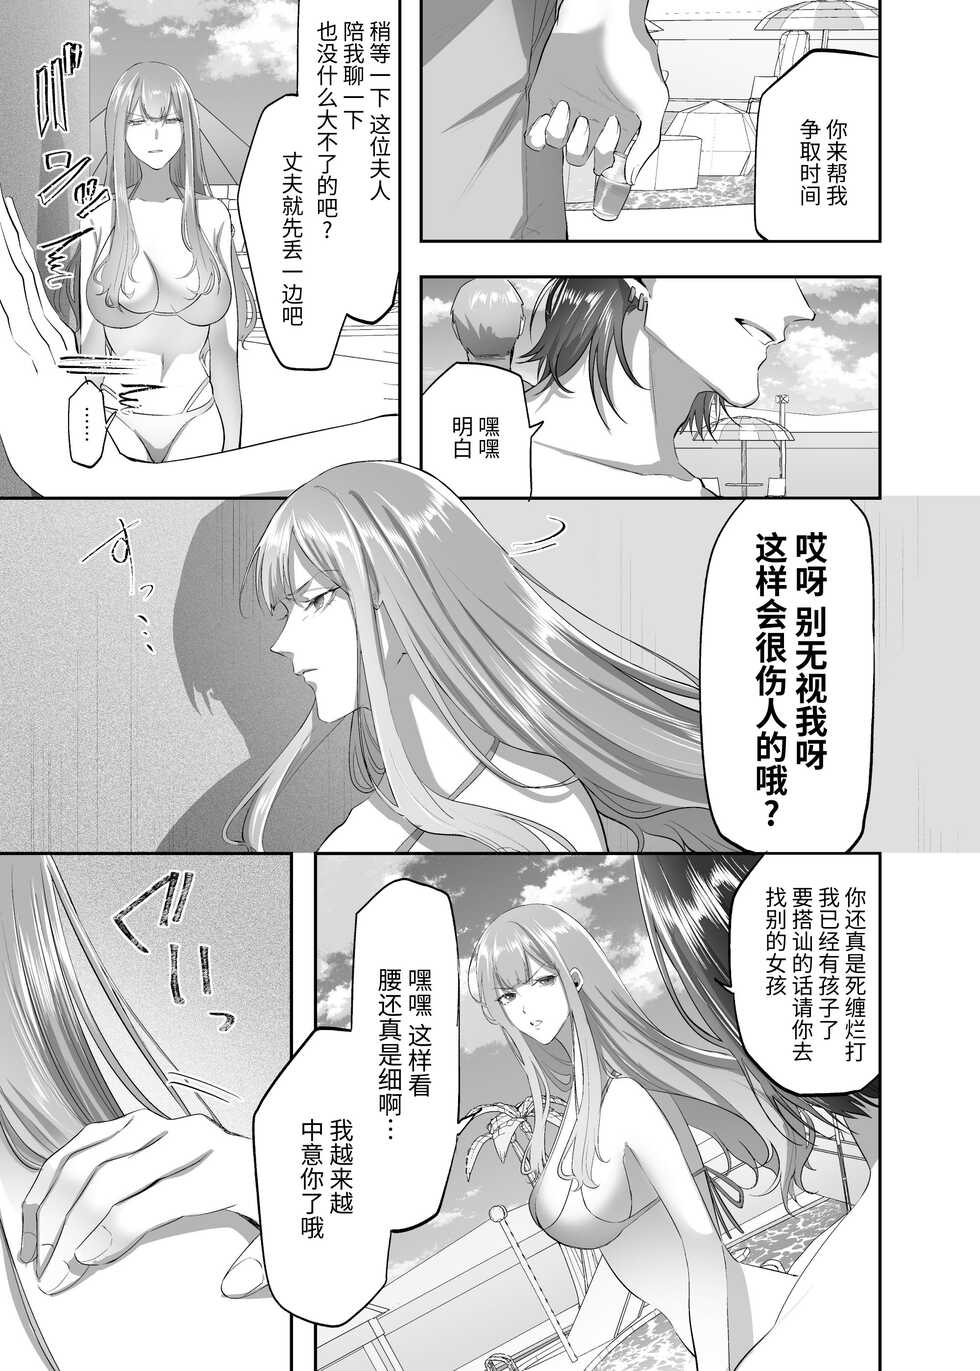 [Hyoui Lover (Duokuma)] NTR (Cuckold / Cuckold) Married Woman [Chinese] [牛肝菌汉化] - Page 8